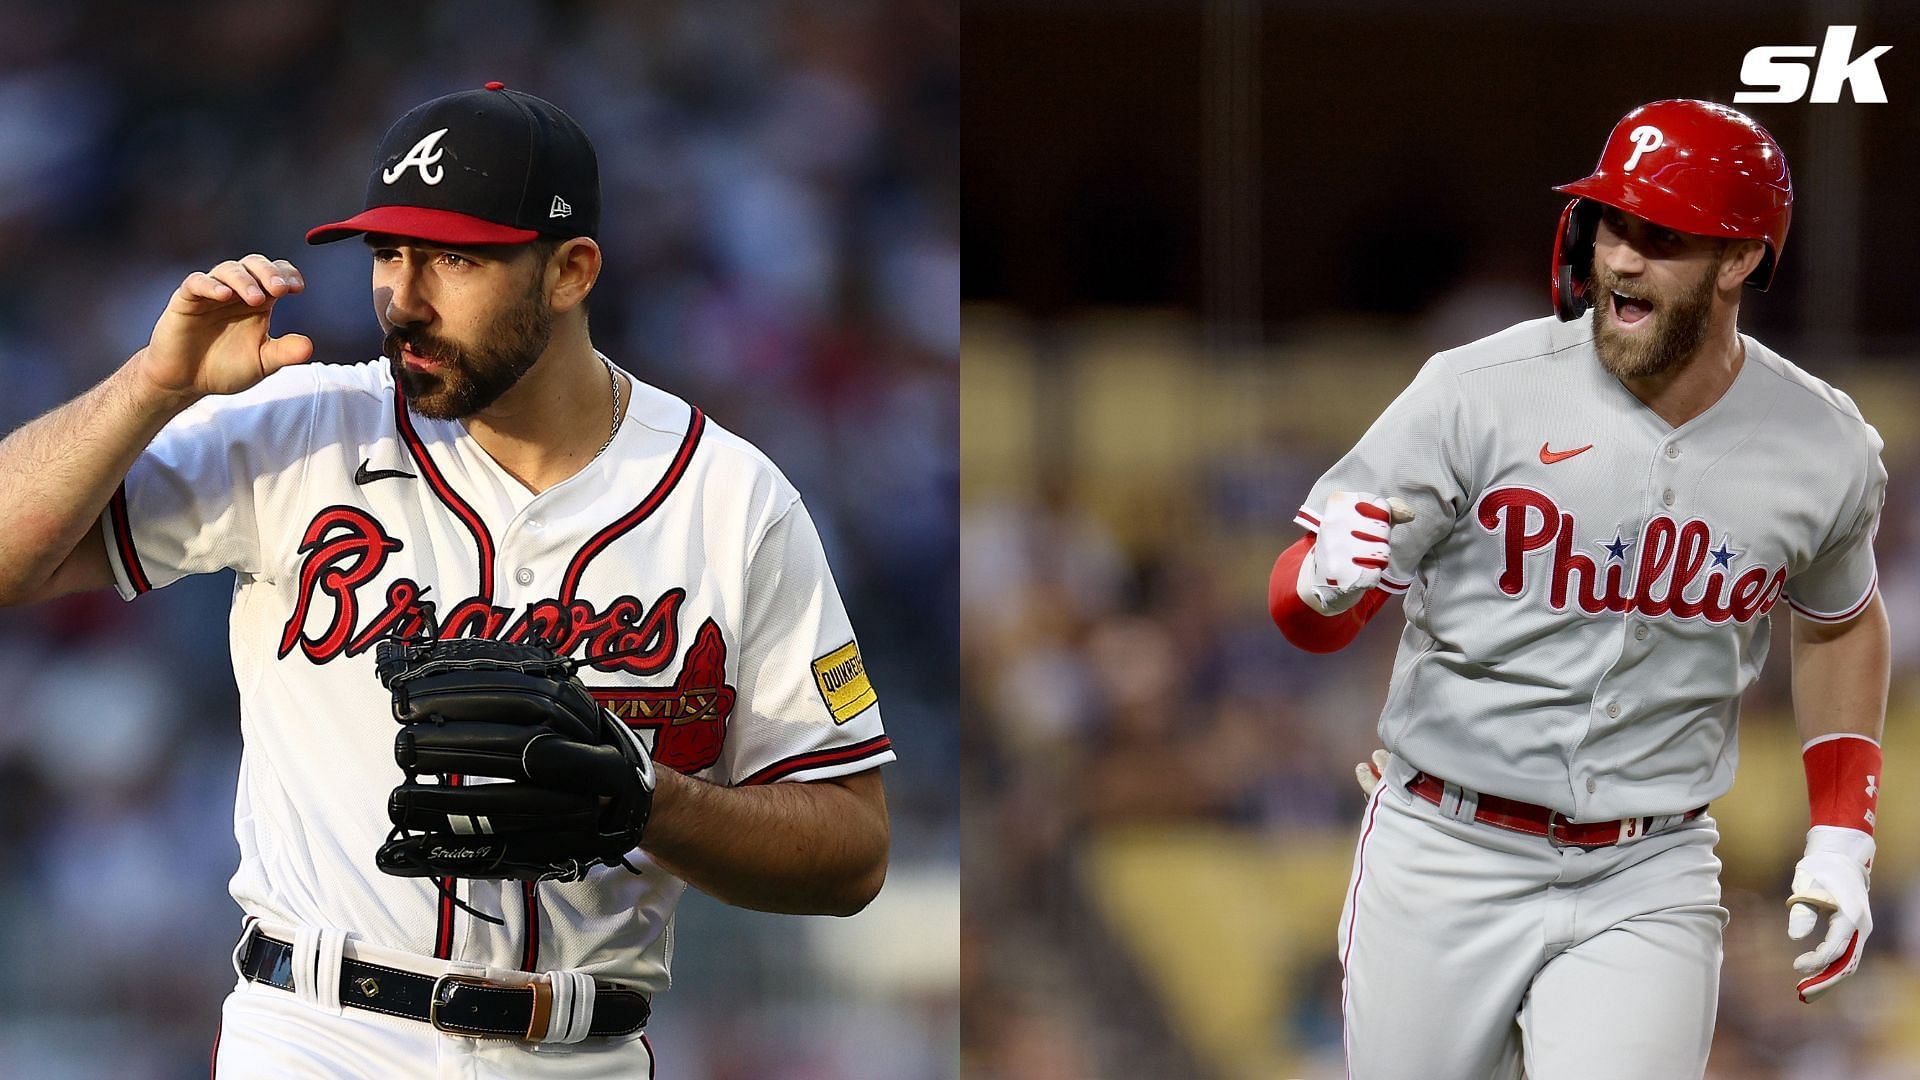 Braves get roasted for intentionally walking Bryce Harper in Game 4 of NLDS. 